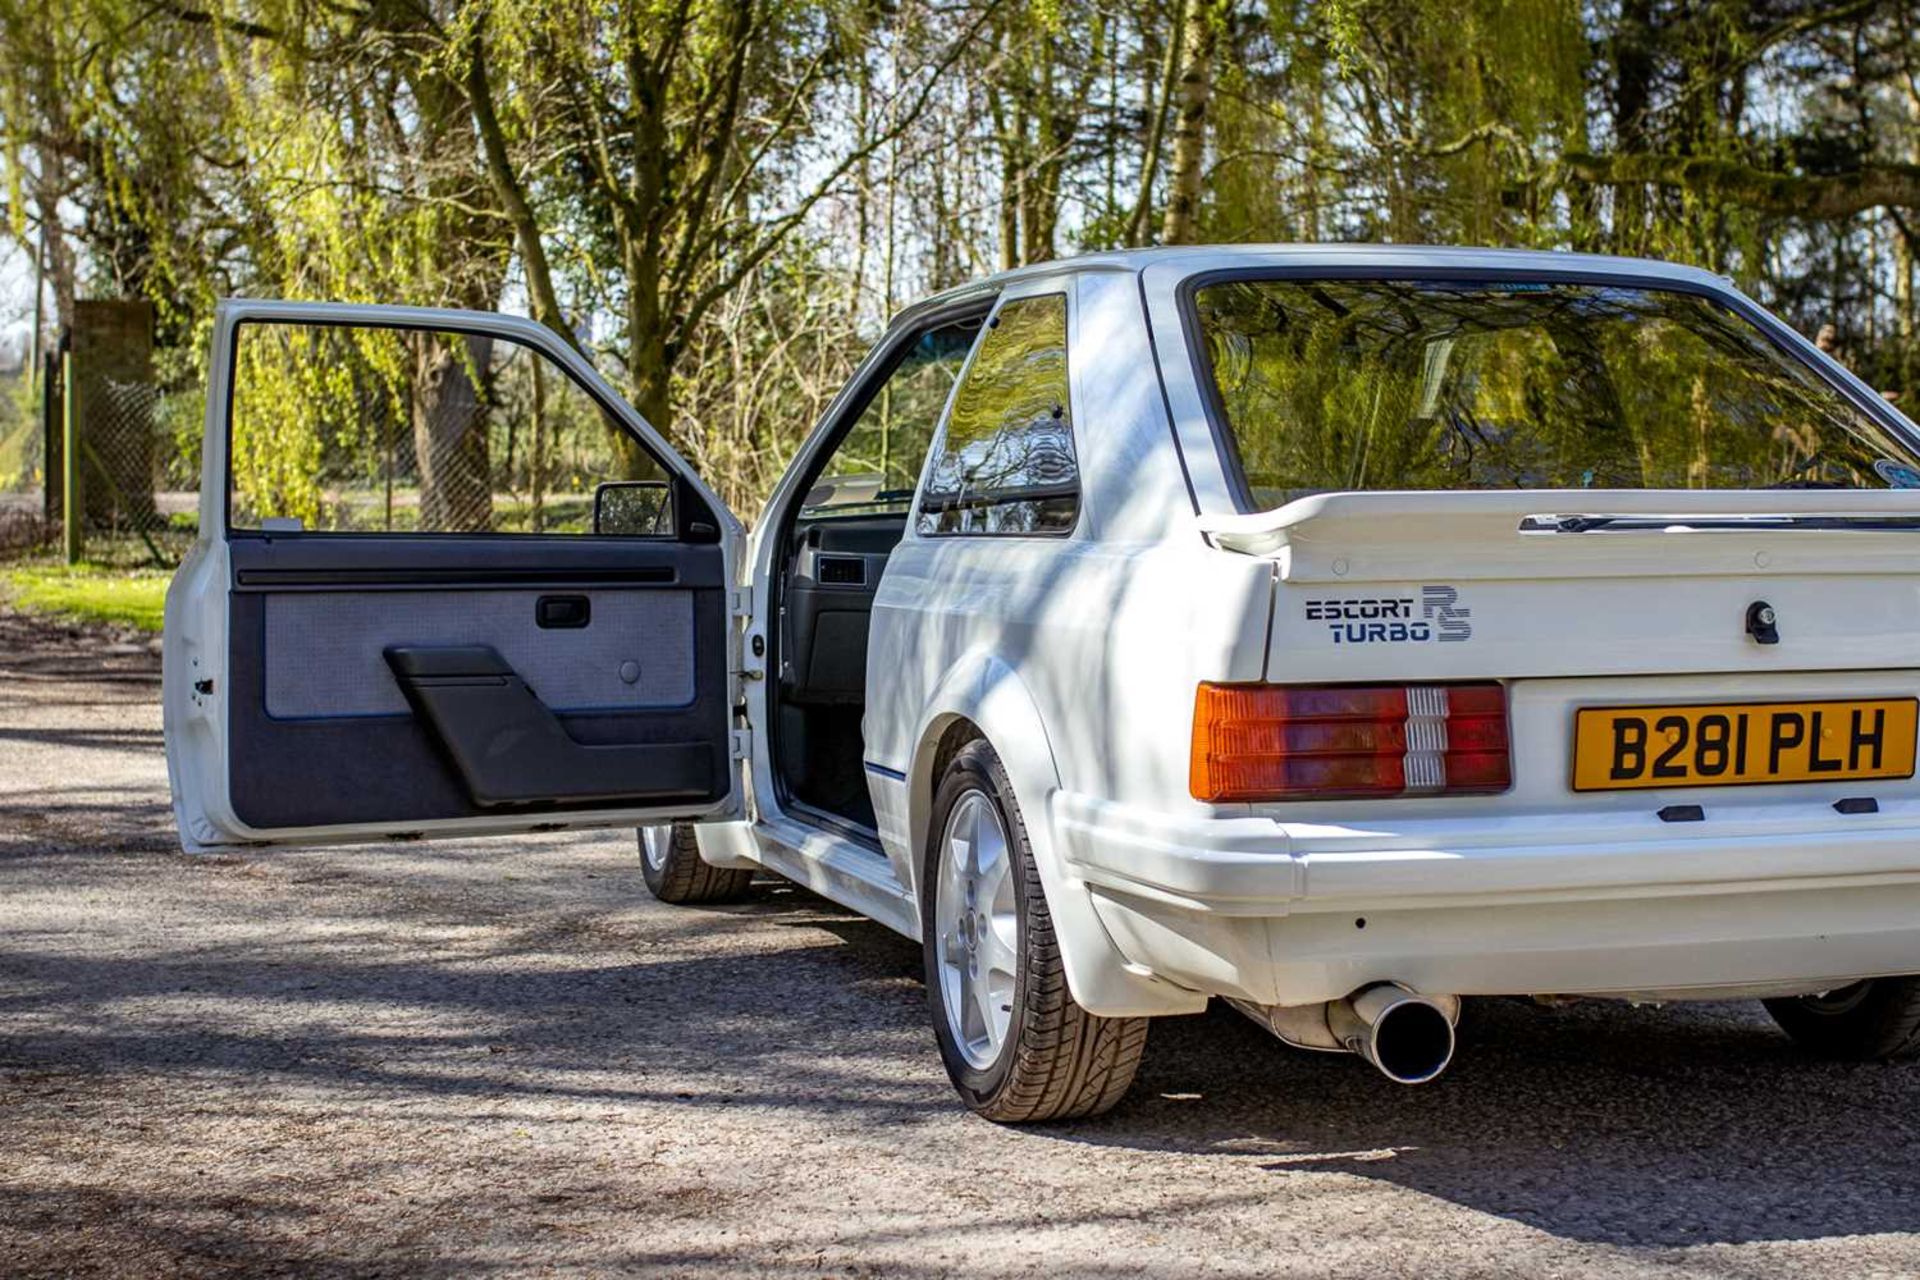 1985 Ford Escort RS Turbo S1 Subject to a full restoration  - Image 66 of 76